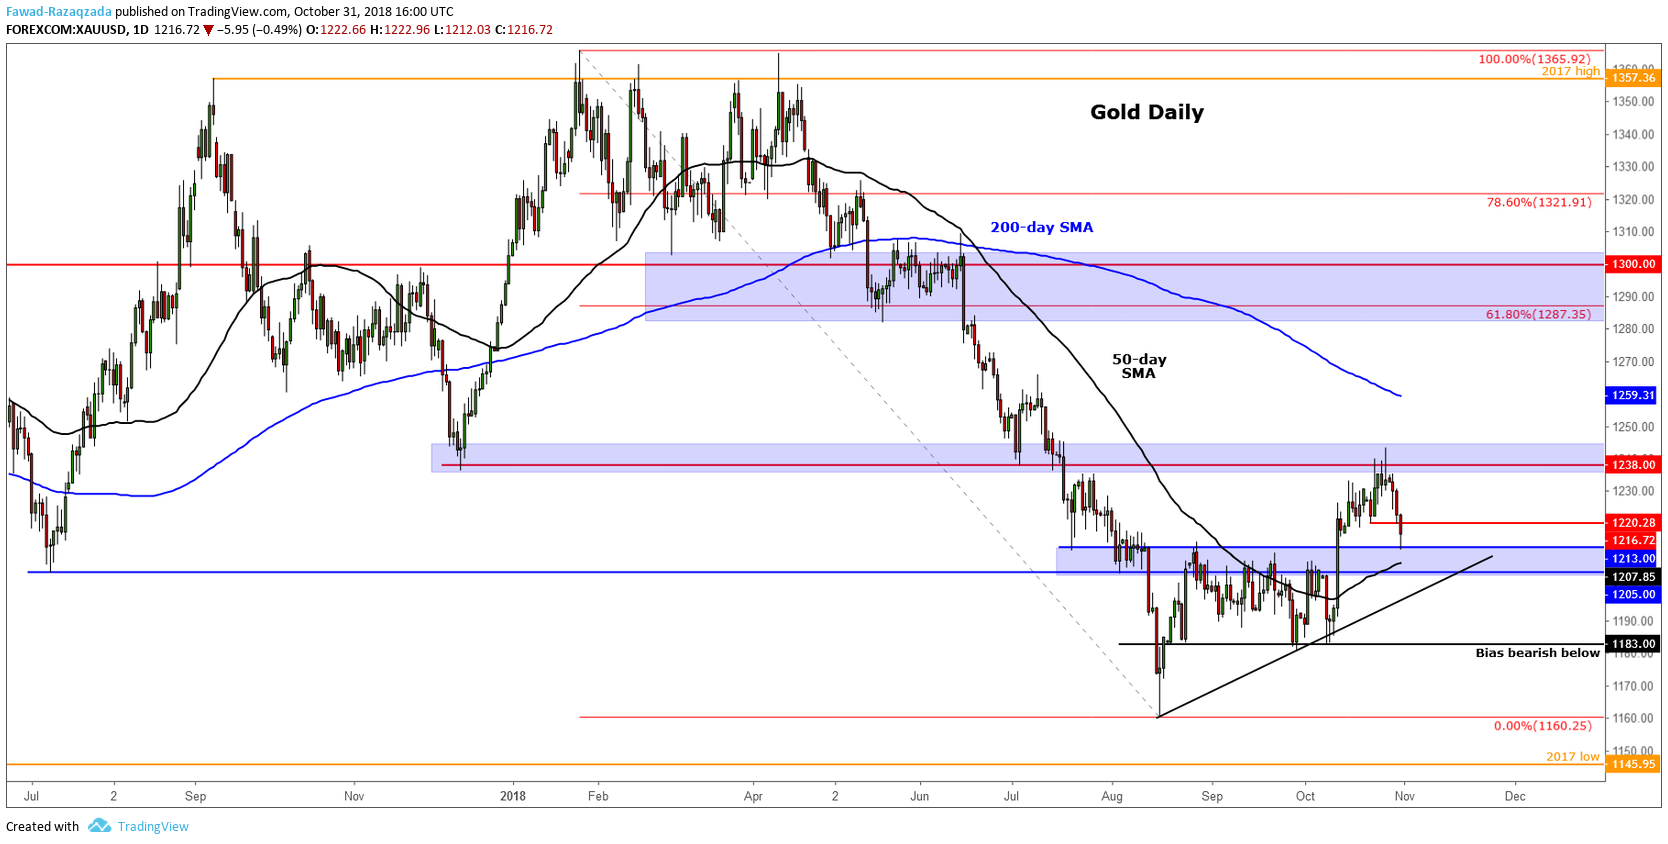 Gold Drops To Test Key Support As Stocks And Dollar Climb - 